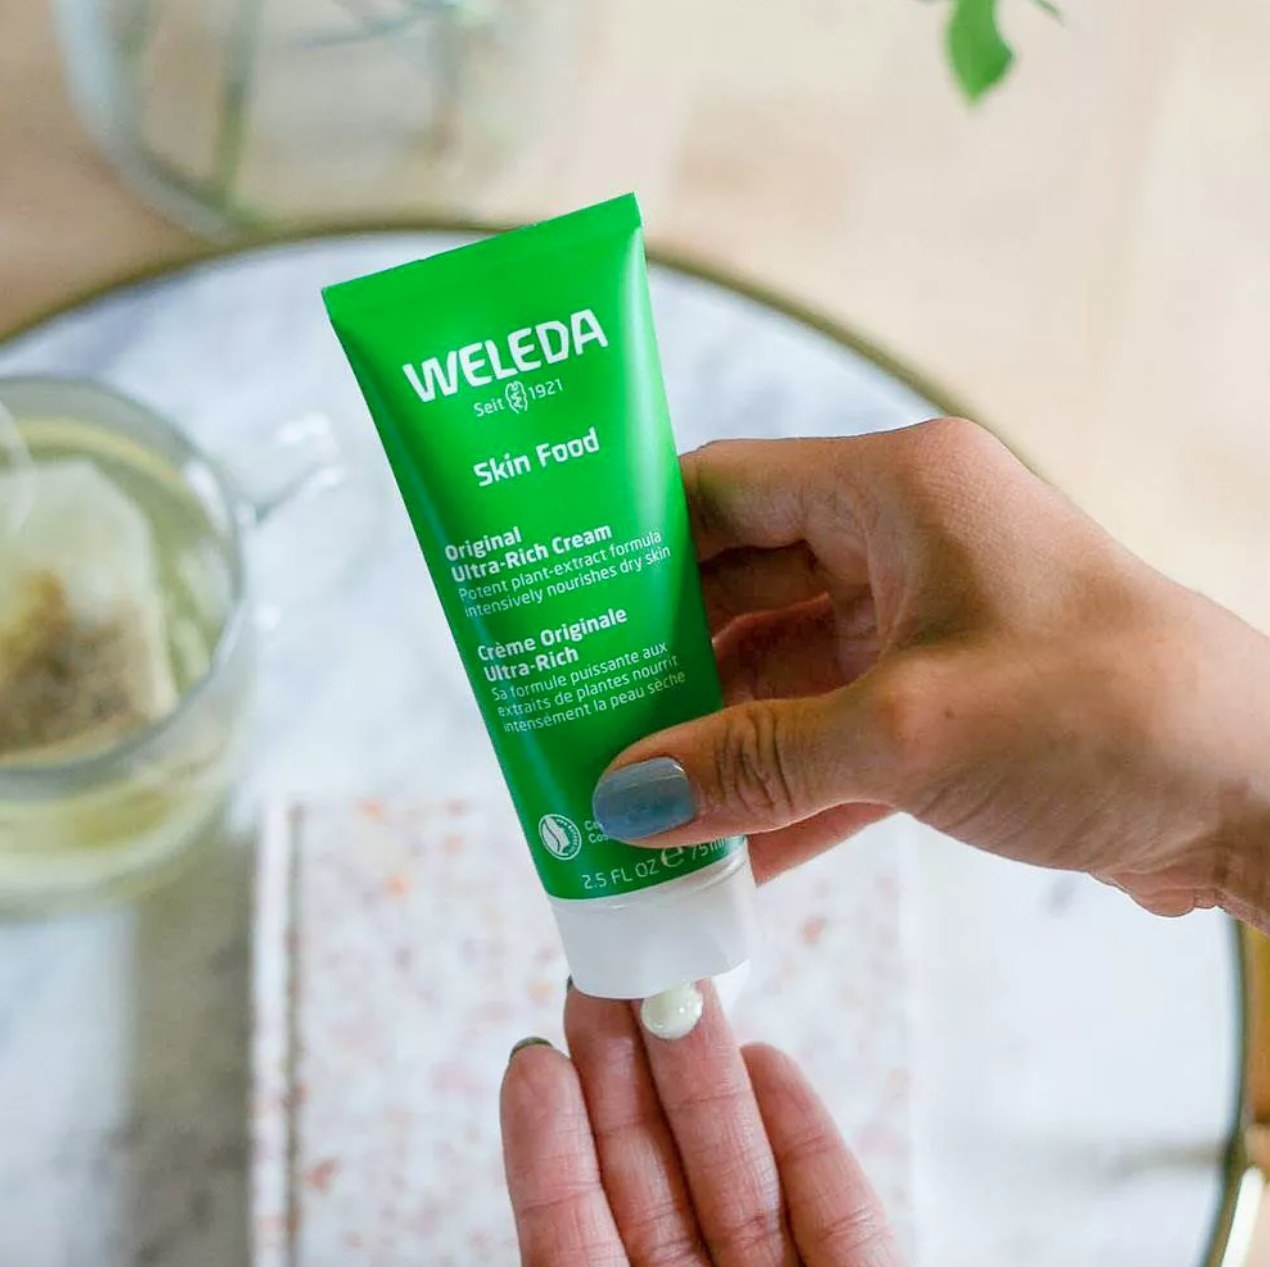 hand squeezing out Weleda cream